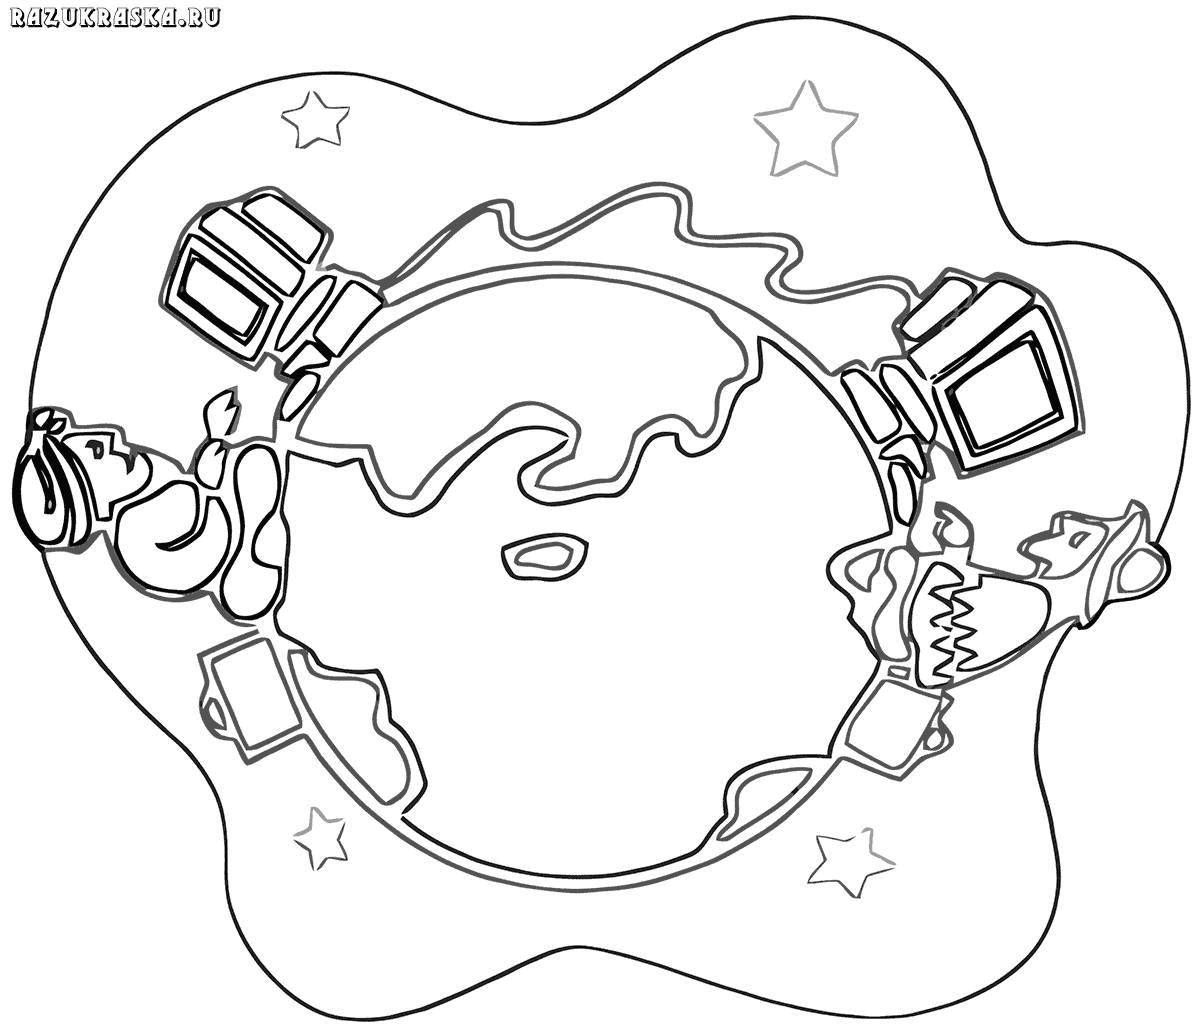 Internet security live coloring page